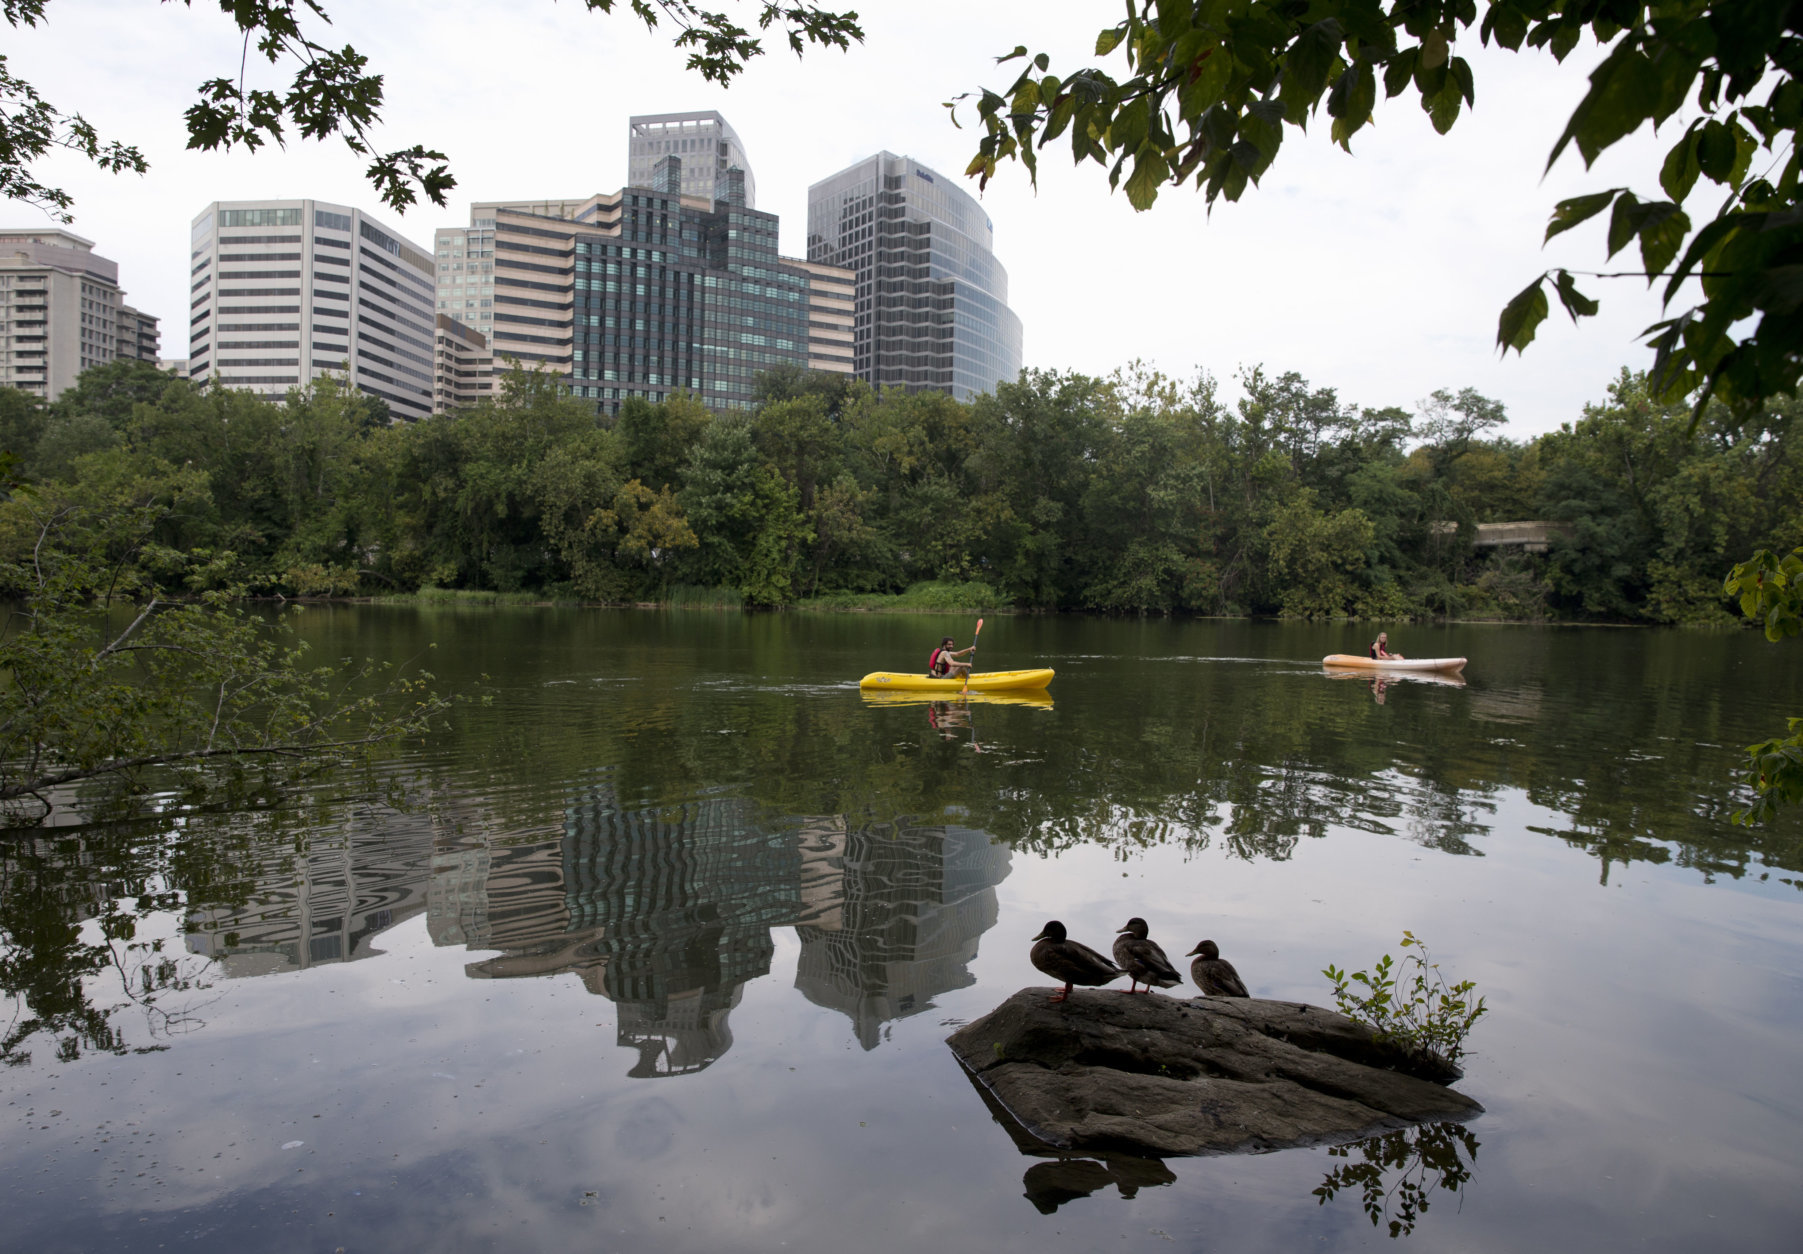 Kayakers paddle past the Rosslyn, Va., skyline, seen from Theodore Roosevelt Island in the Potomac River in Washington, Tuesday, Aug. 18, 2015. (AP Photo/Carolyn Kaster)